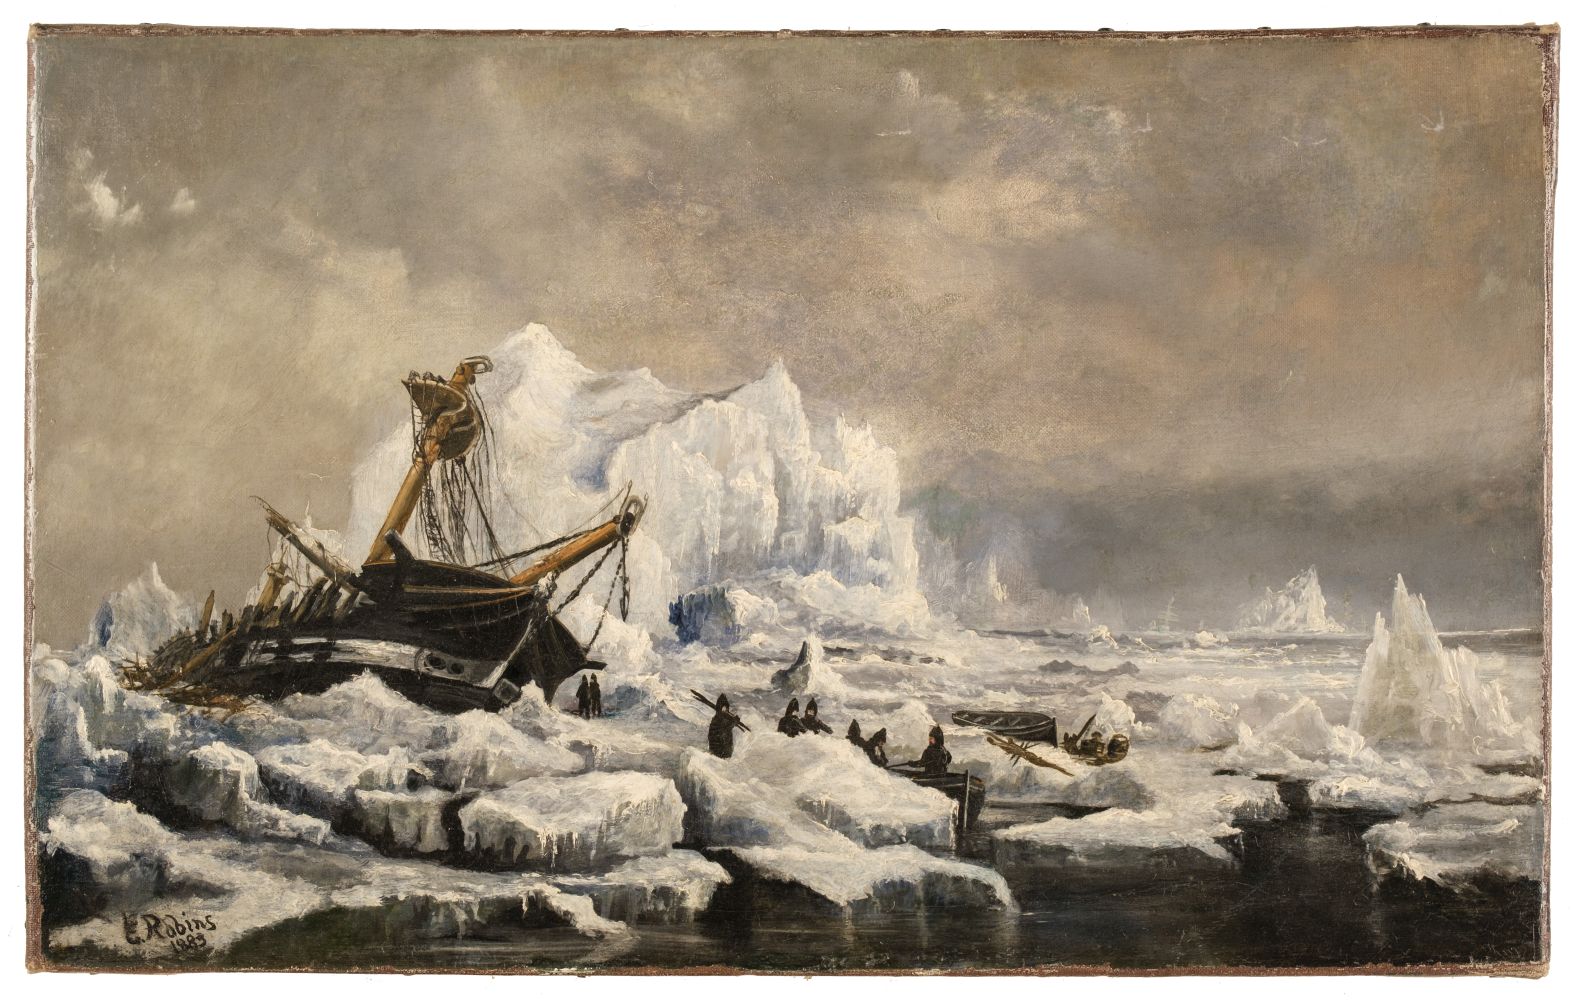 Robins (E., active 1882-1902). Arctic expedition ship and crew trapped in ice, 1883 - Image 2 of 2